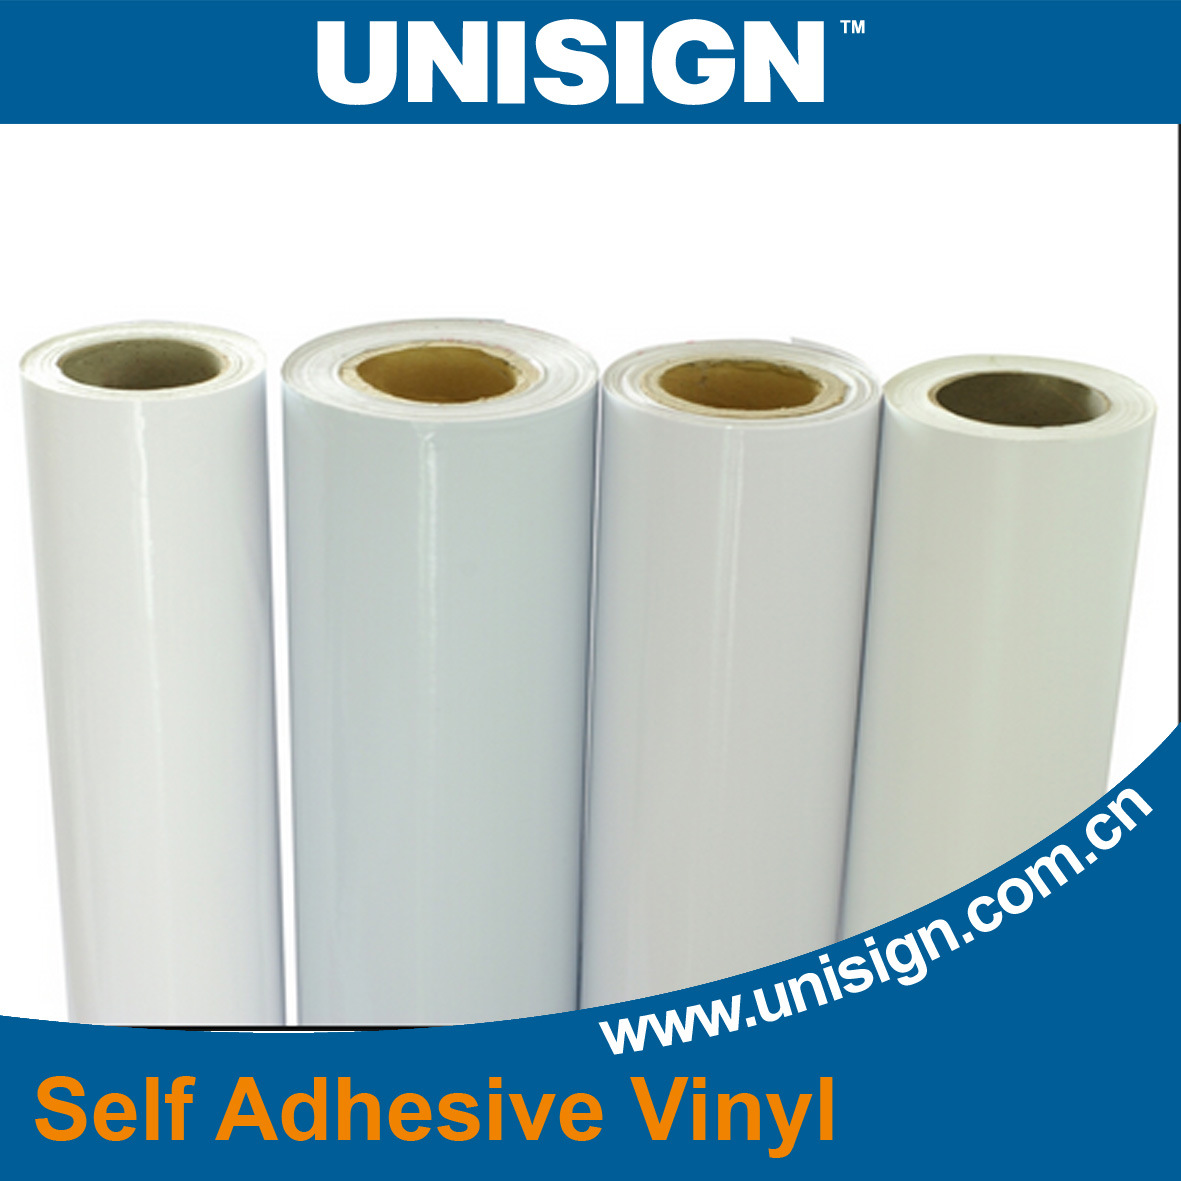 Self Adhesive Vinyl for Eco-Solvent Printing